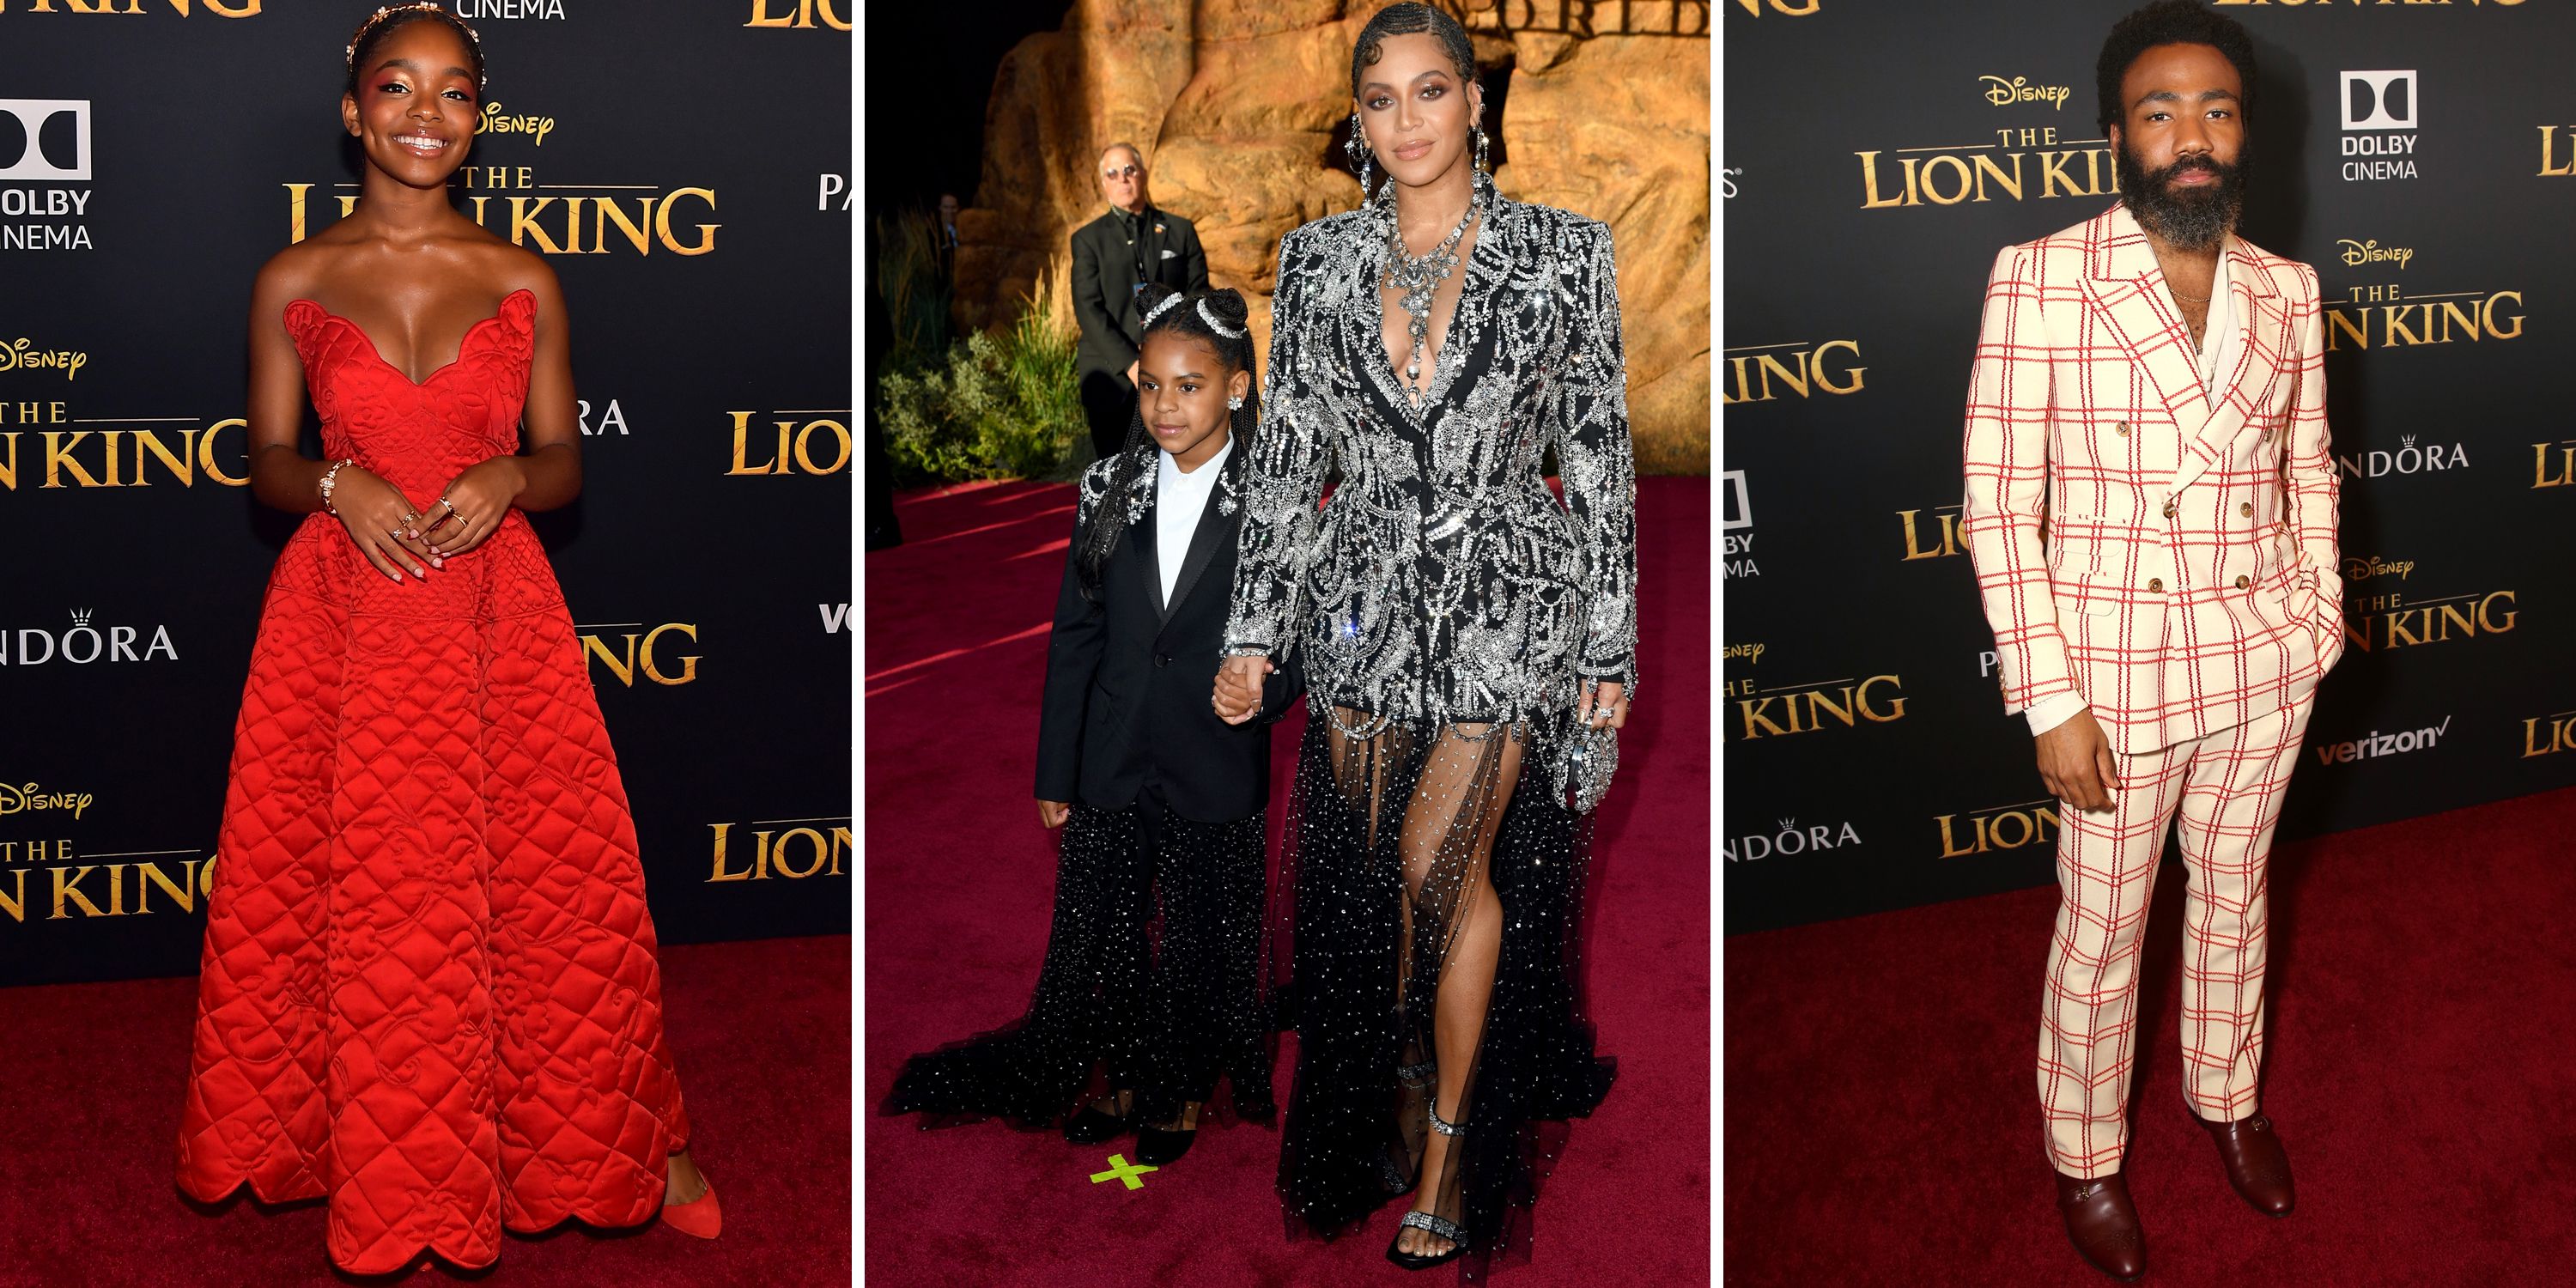 beproeving hun ventilatie The Best Red Carpet Looks at 'The Lion King' Premiere in LA